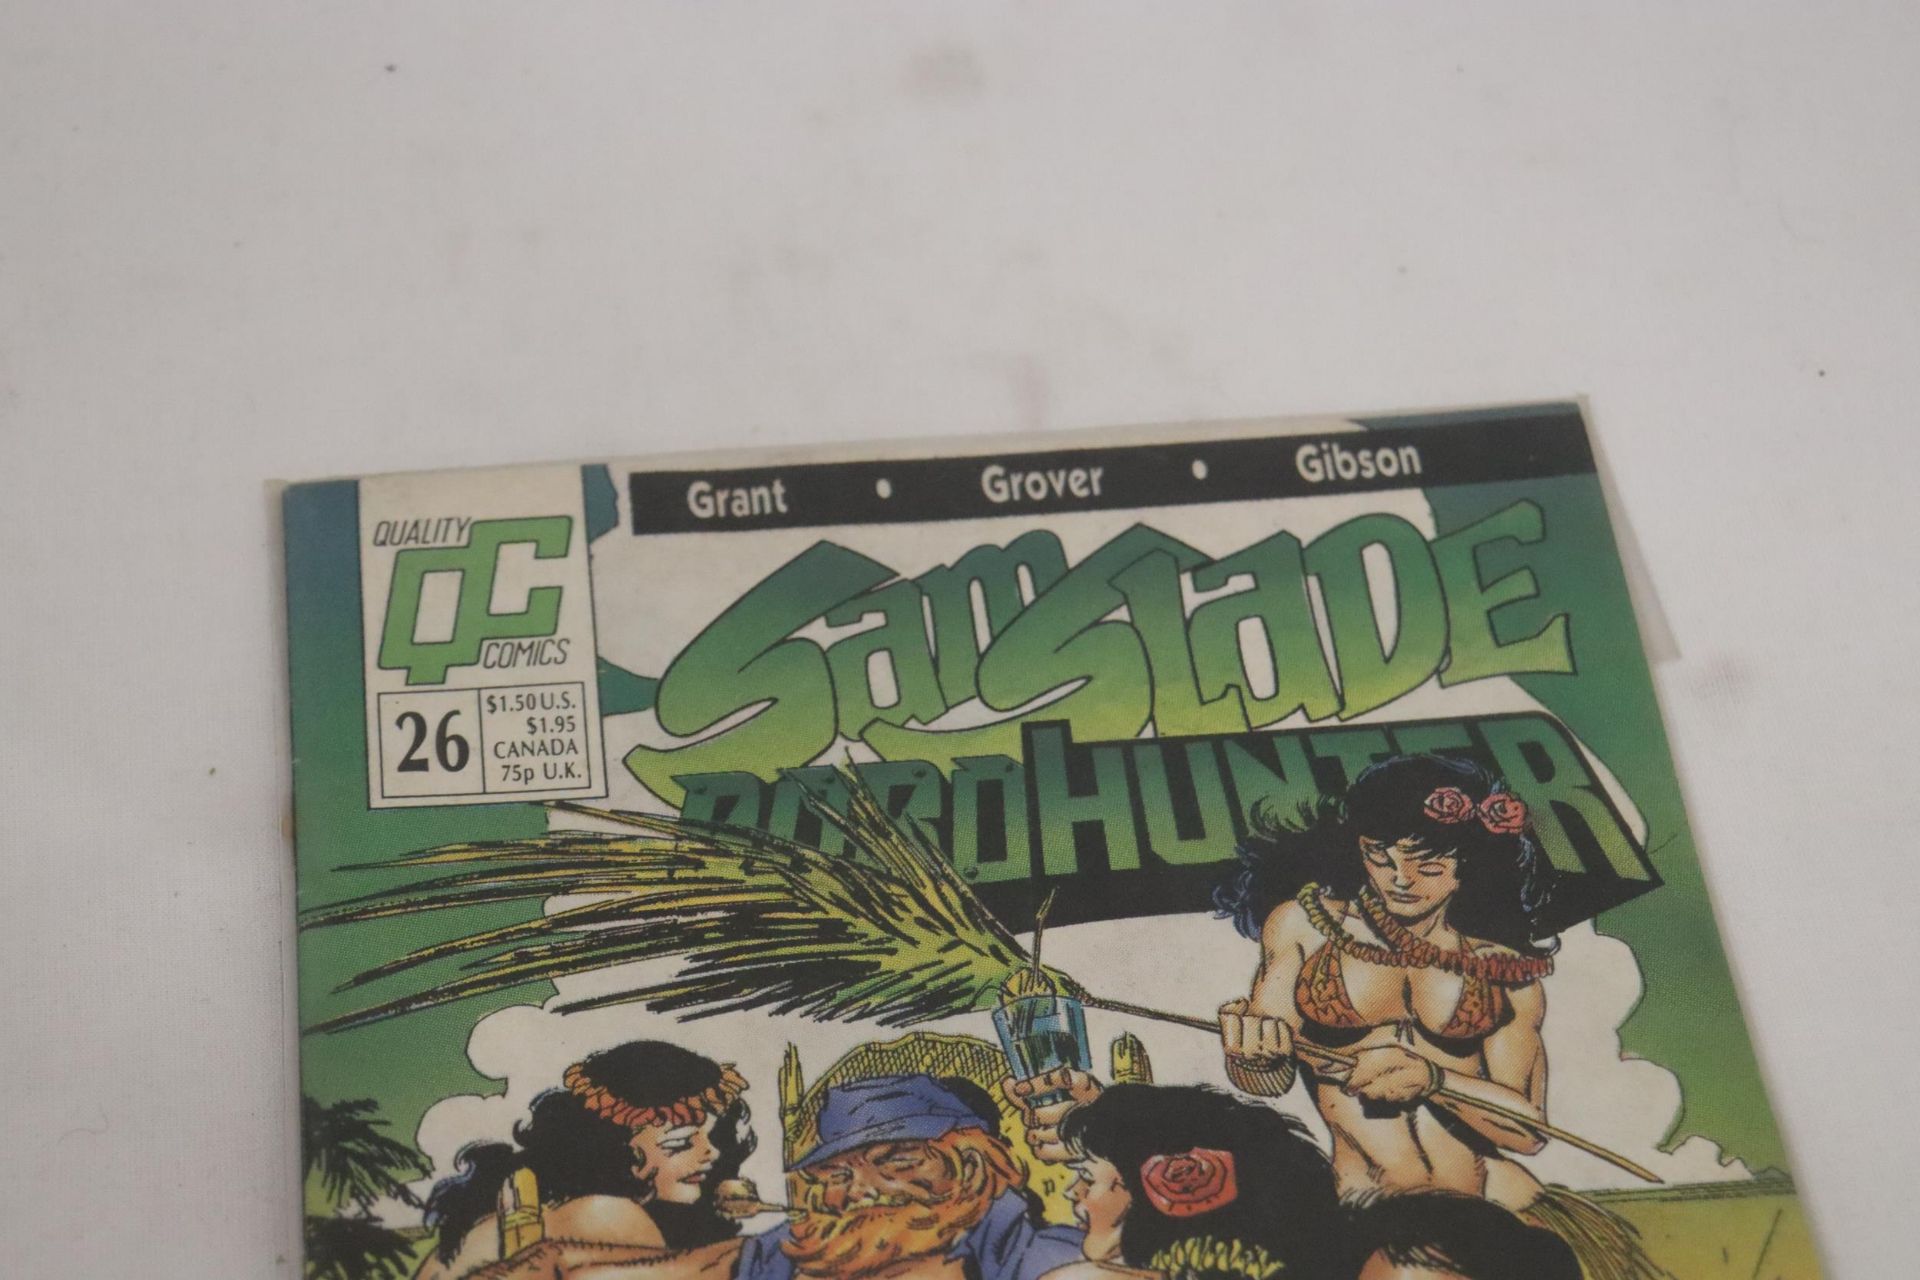 A SAM SLADE, BOROHUNTER COMIC, BY QUALITY COMICS, ISSUE 26, GOOD CONDITION - Image 2 of 4